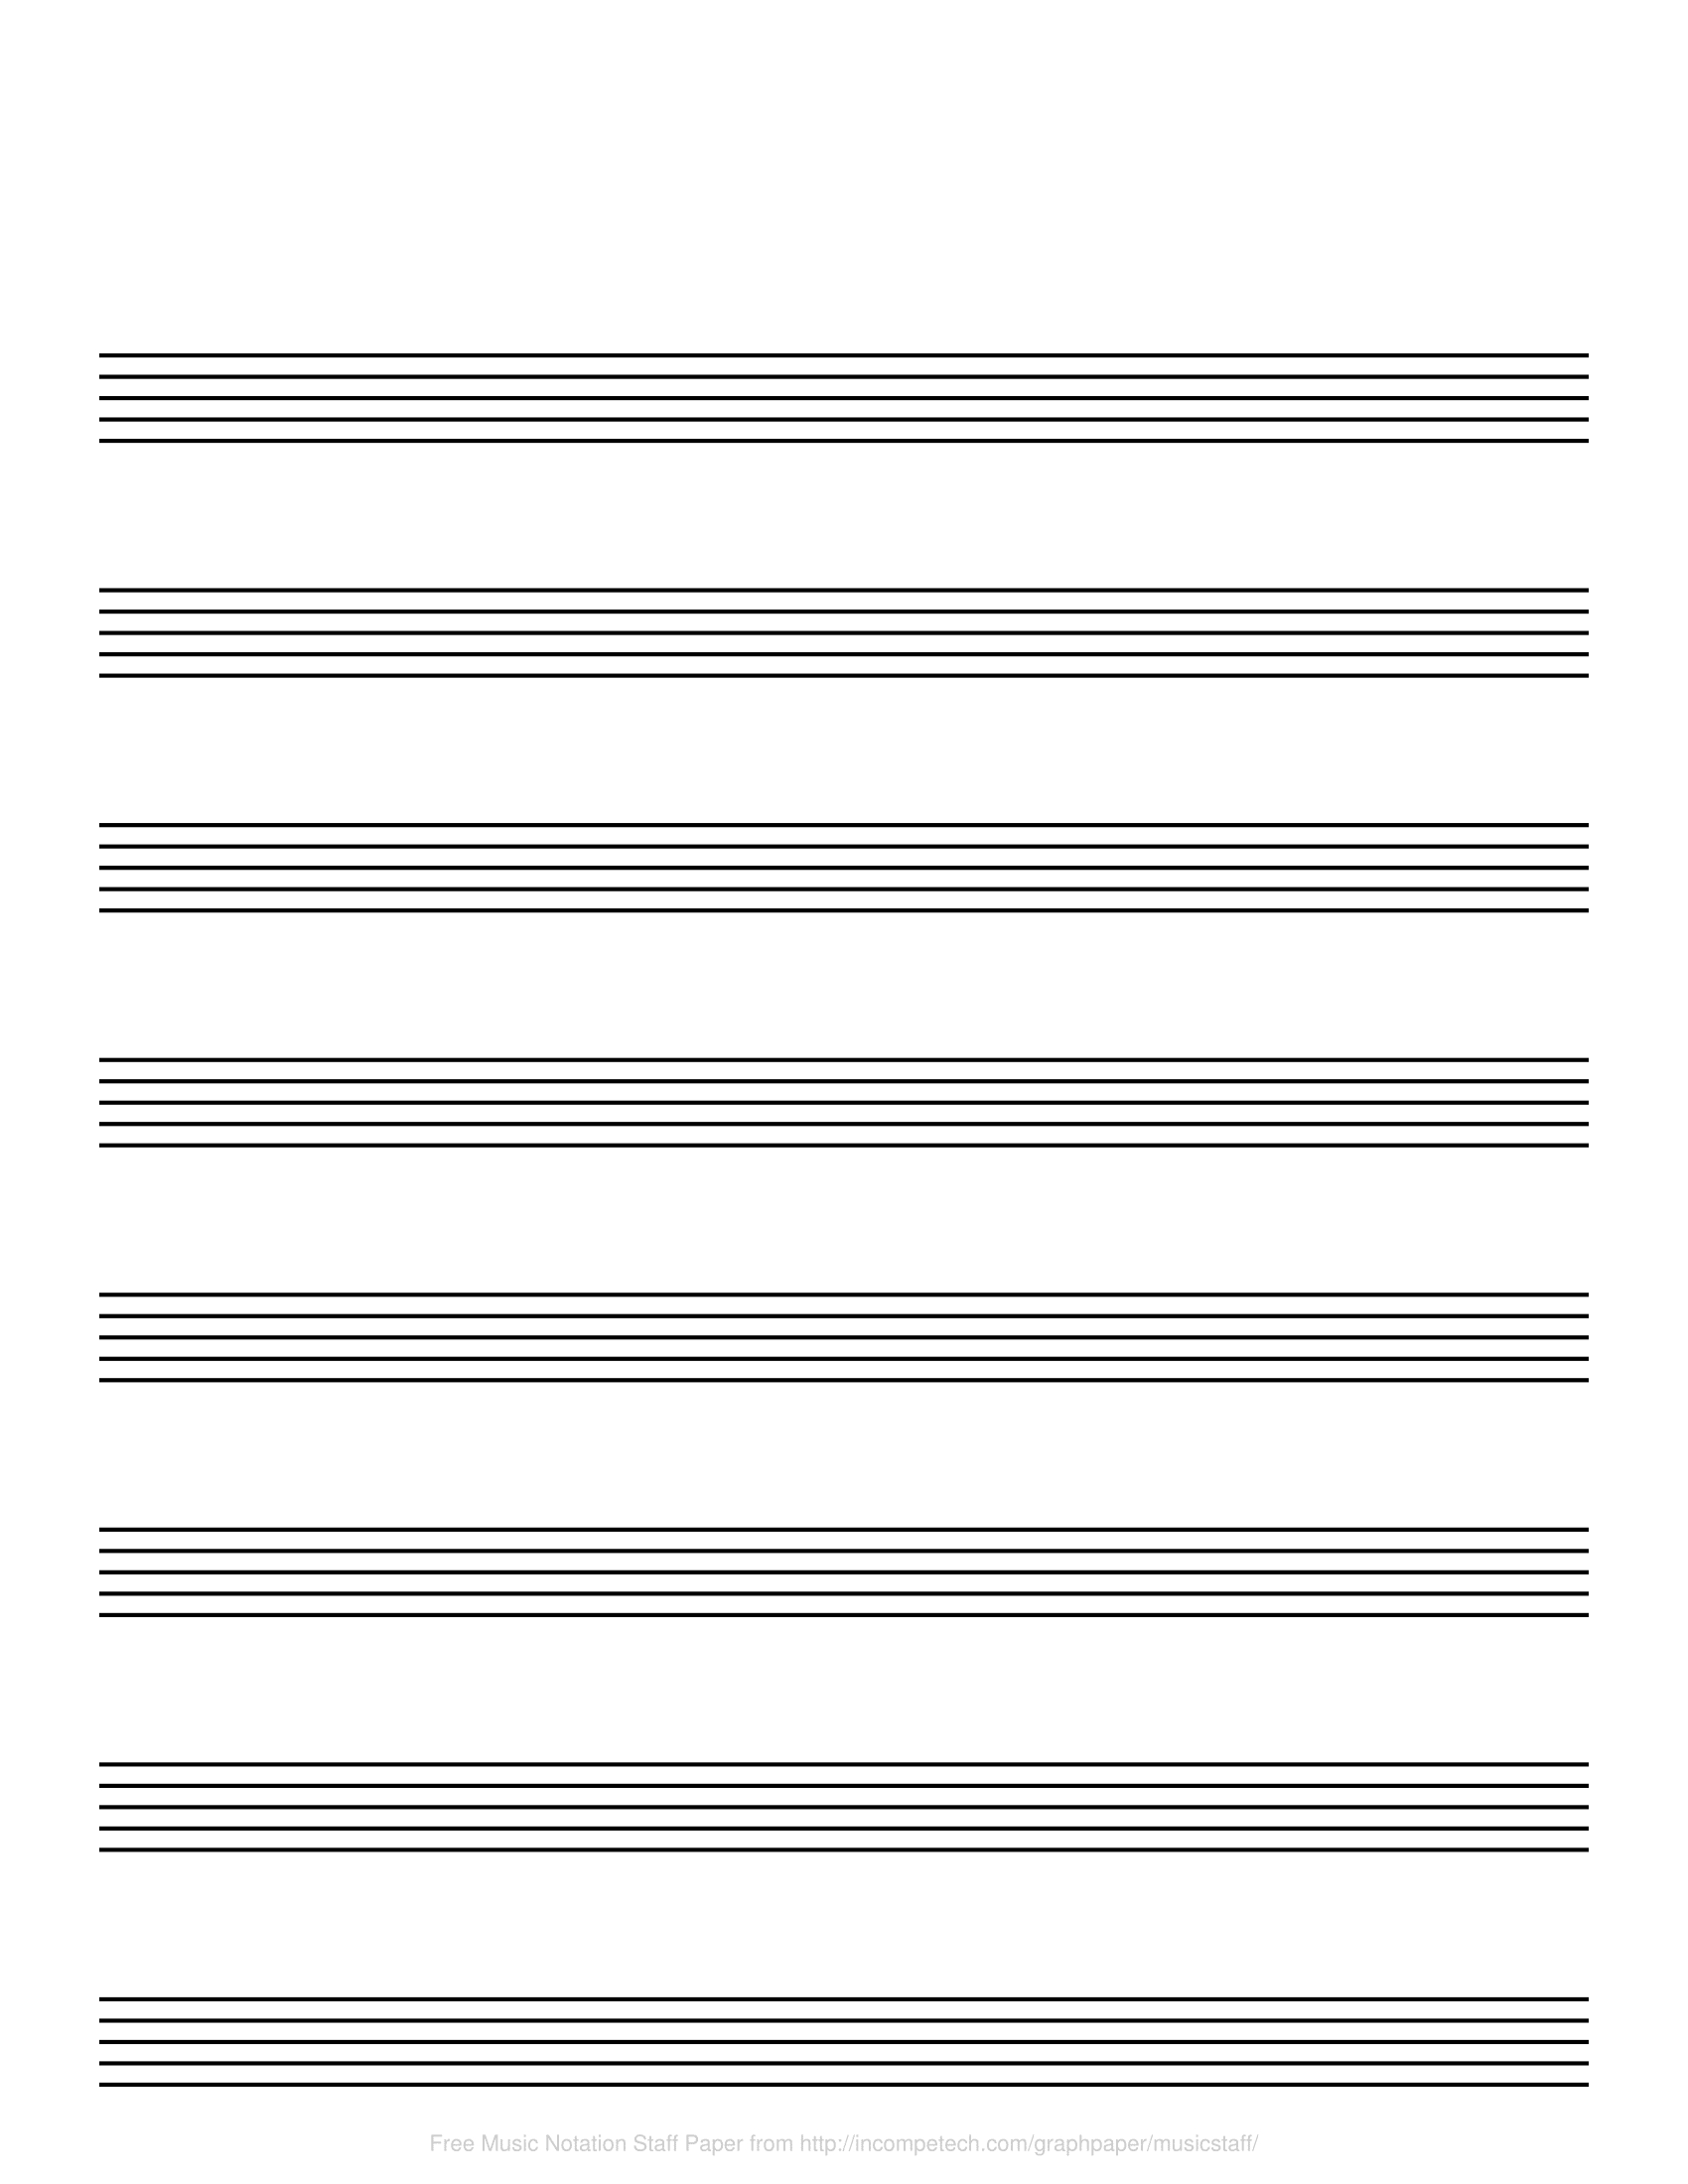 Free Online Graph Paper / Music Notation - Free Printable Blank Music Staff Paper